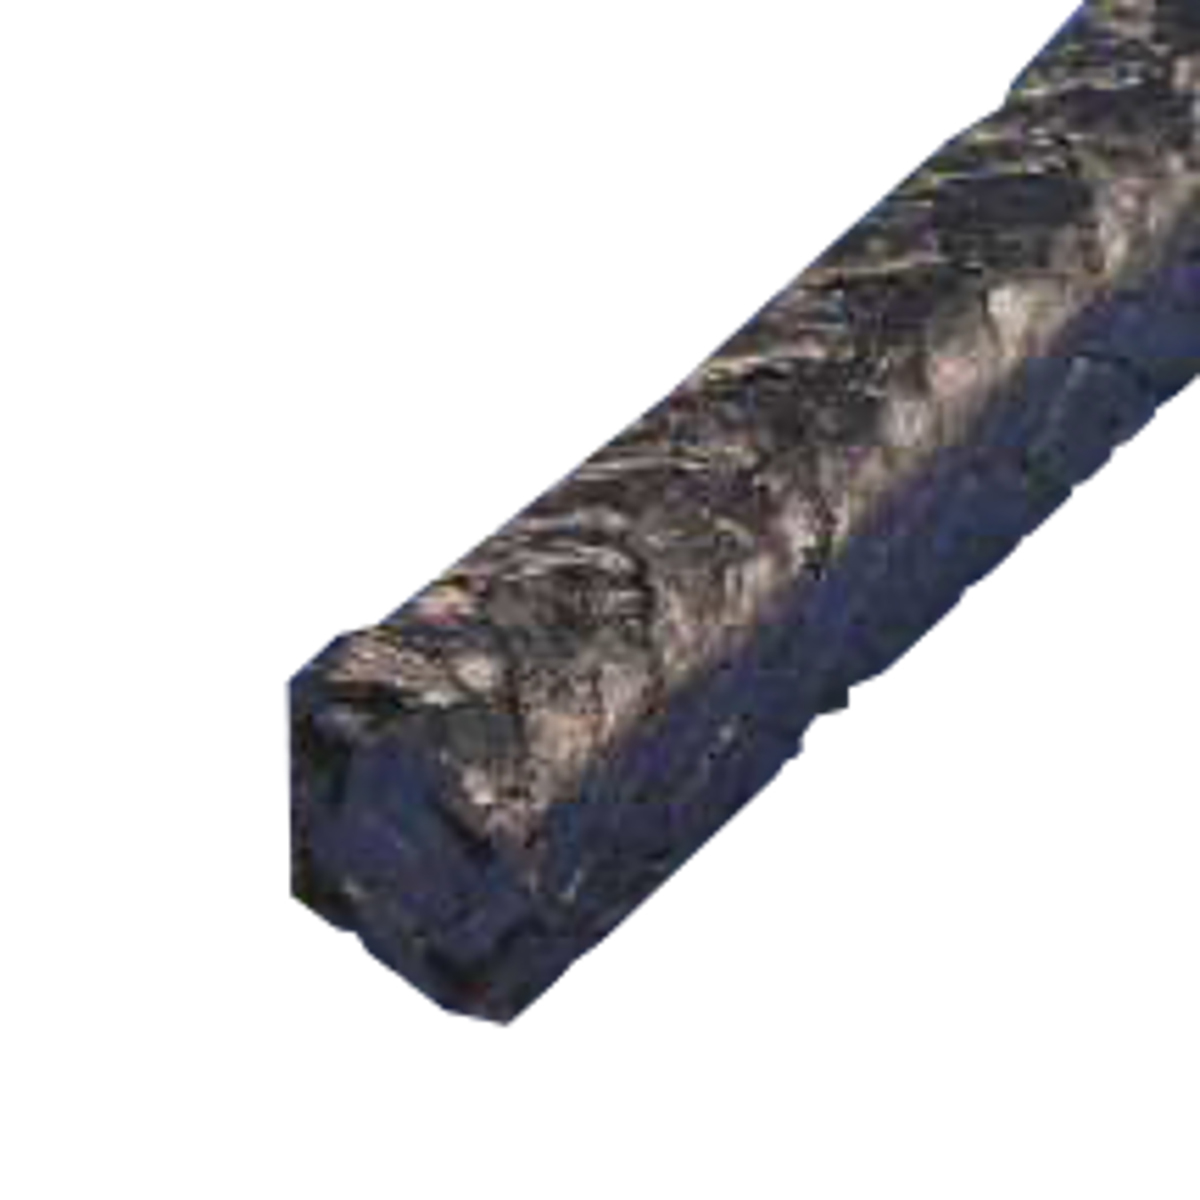 A high quality, high strength pump and valve packing, Marigold 5000CC Packing is braided from graphite yarns reinforced with carbon filament for strength.